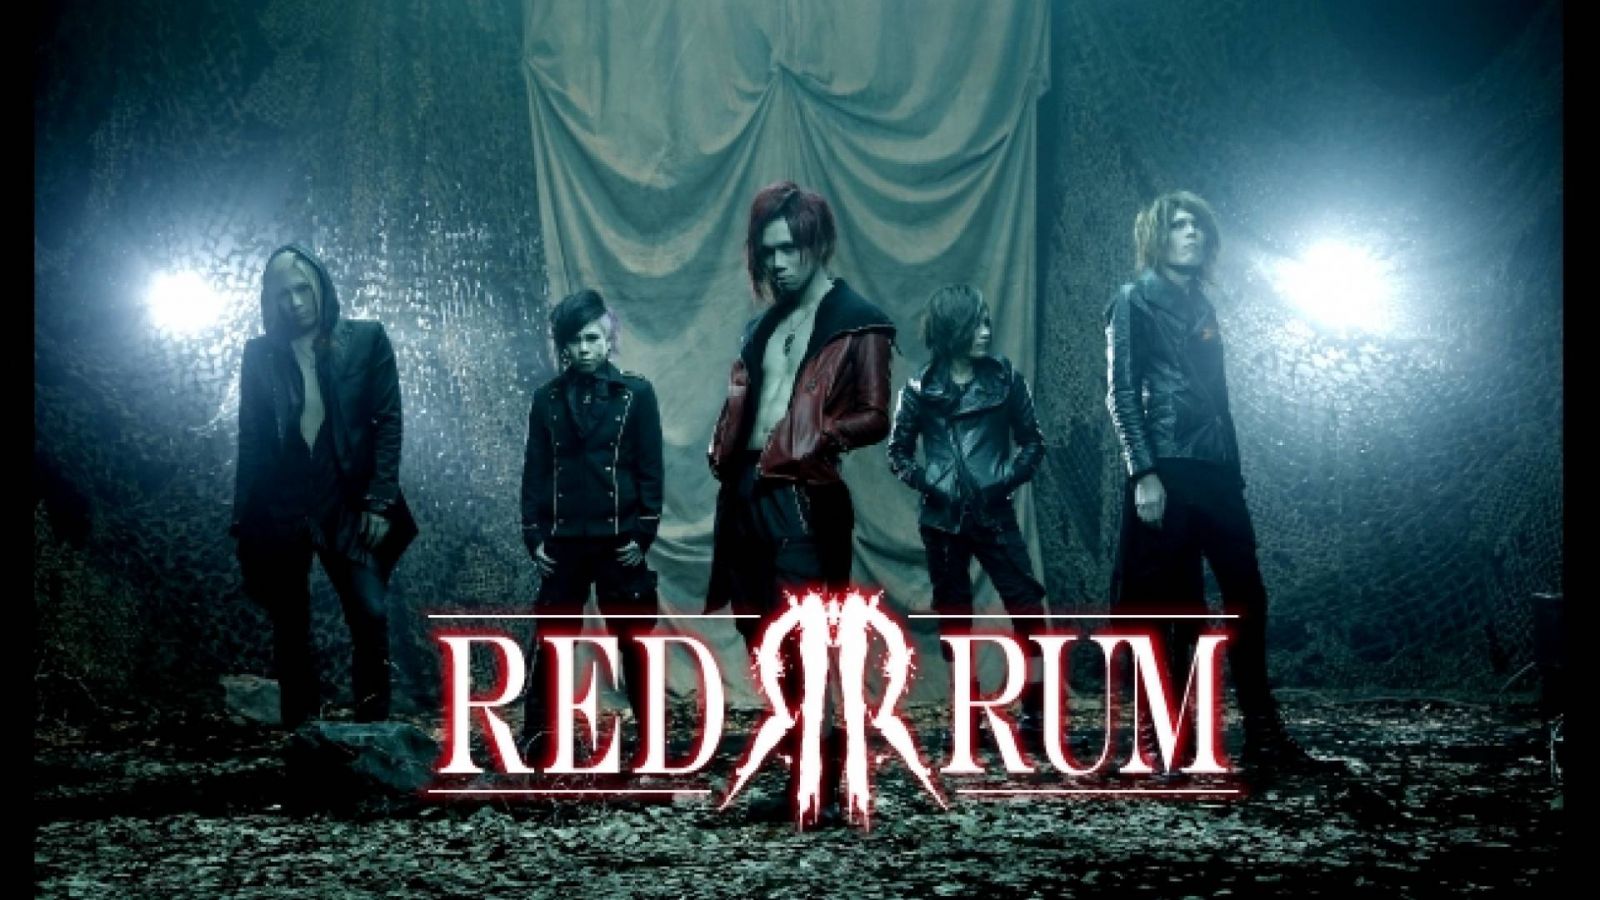 RedruM - INITIUM © GOD CHILD RECORDS. All Rights Reserved.